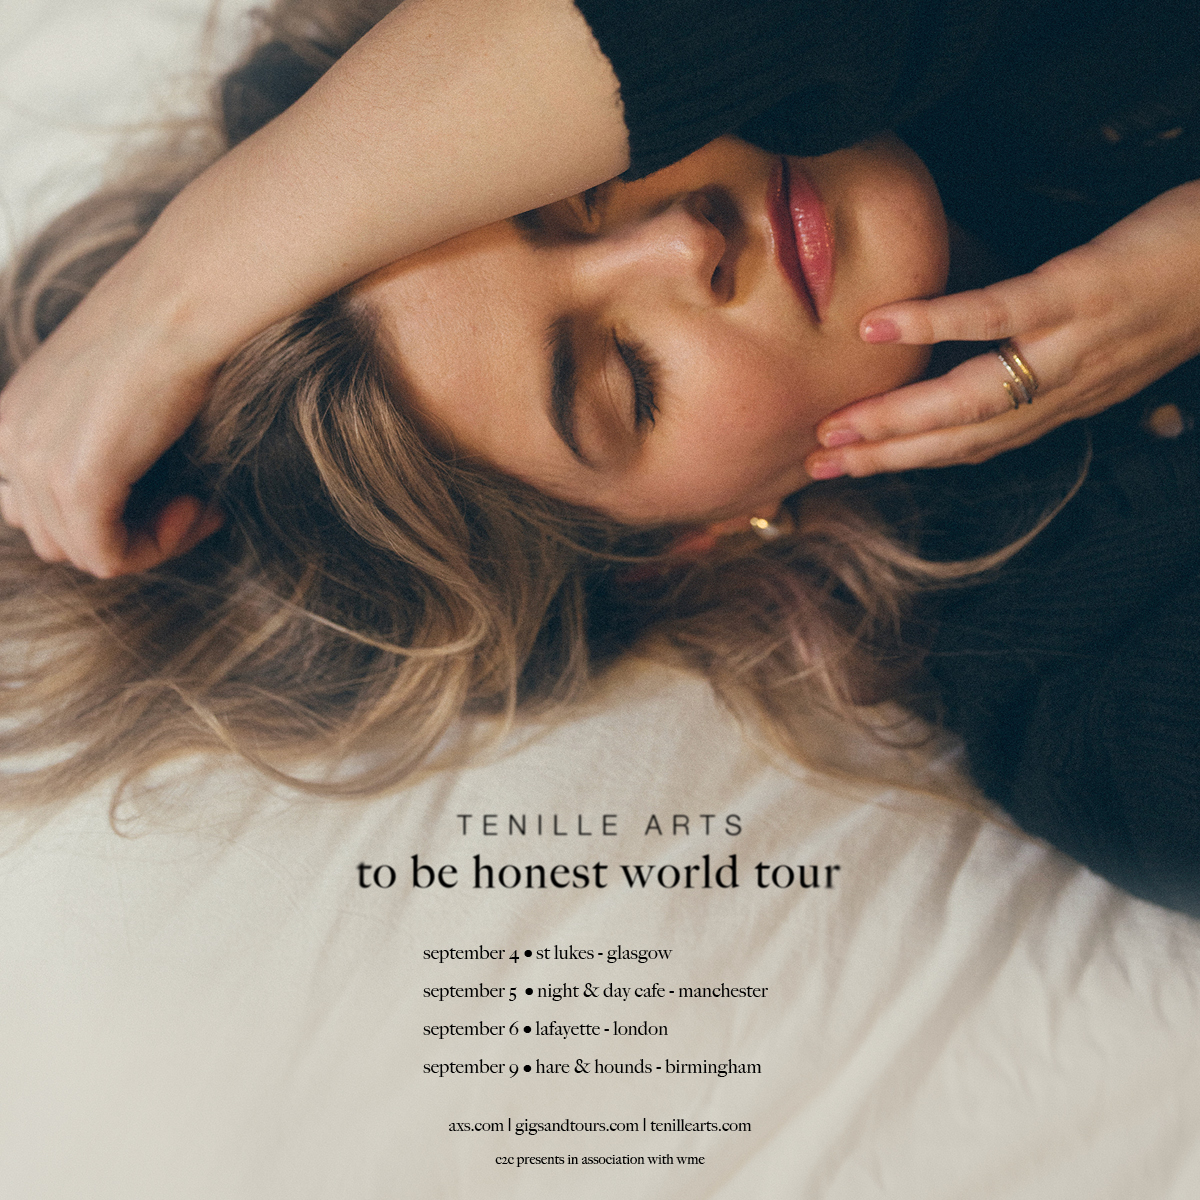 ✨ @TenilleArts has announced the 'to be honest world tour' - with a string of headline UK shows this September! 💕 Tickets go on sale 10am this Fri via @gigsandtours & @AXS_UK